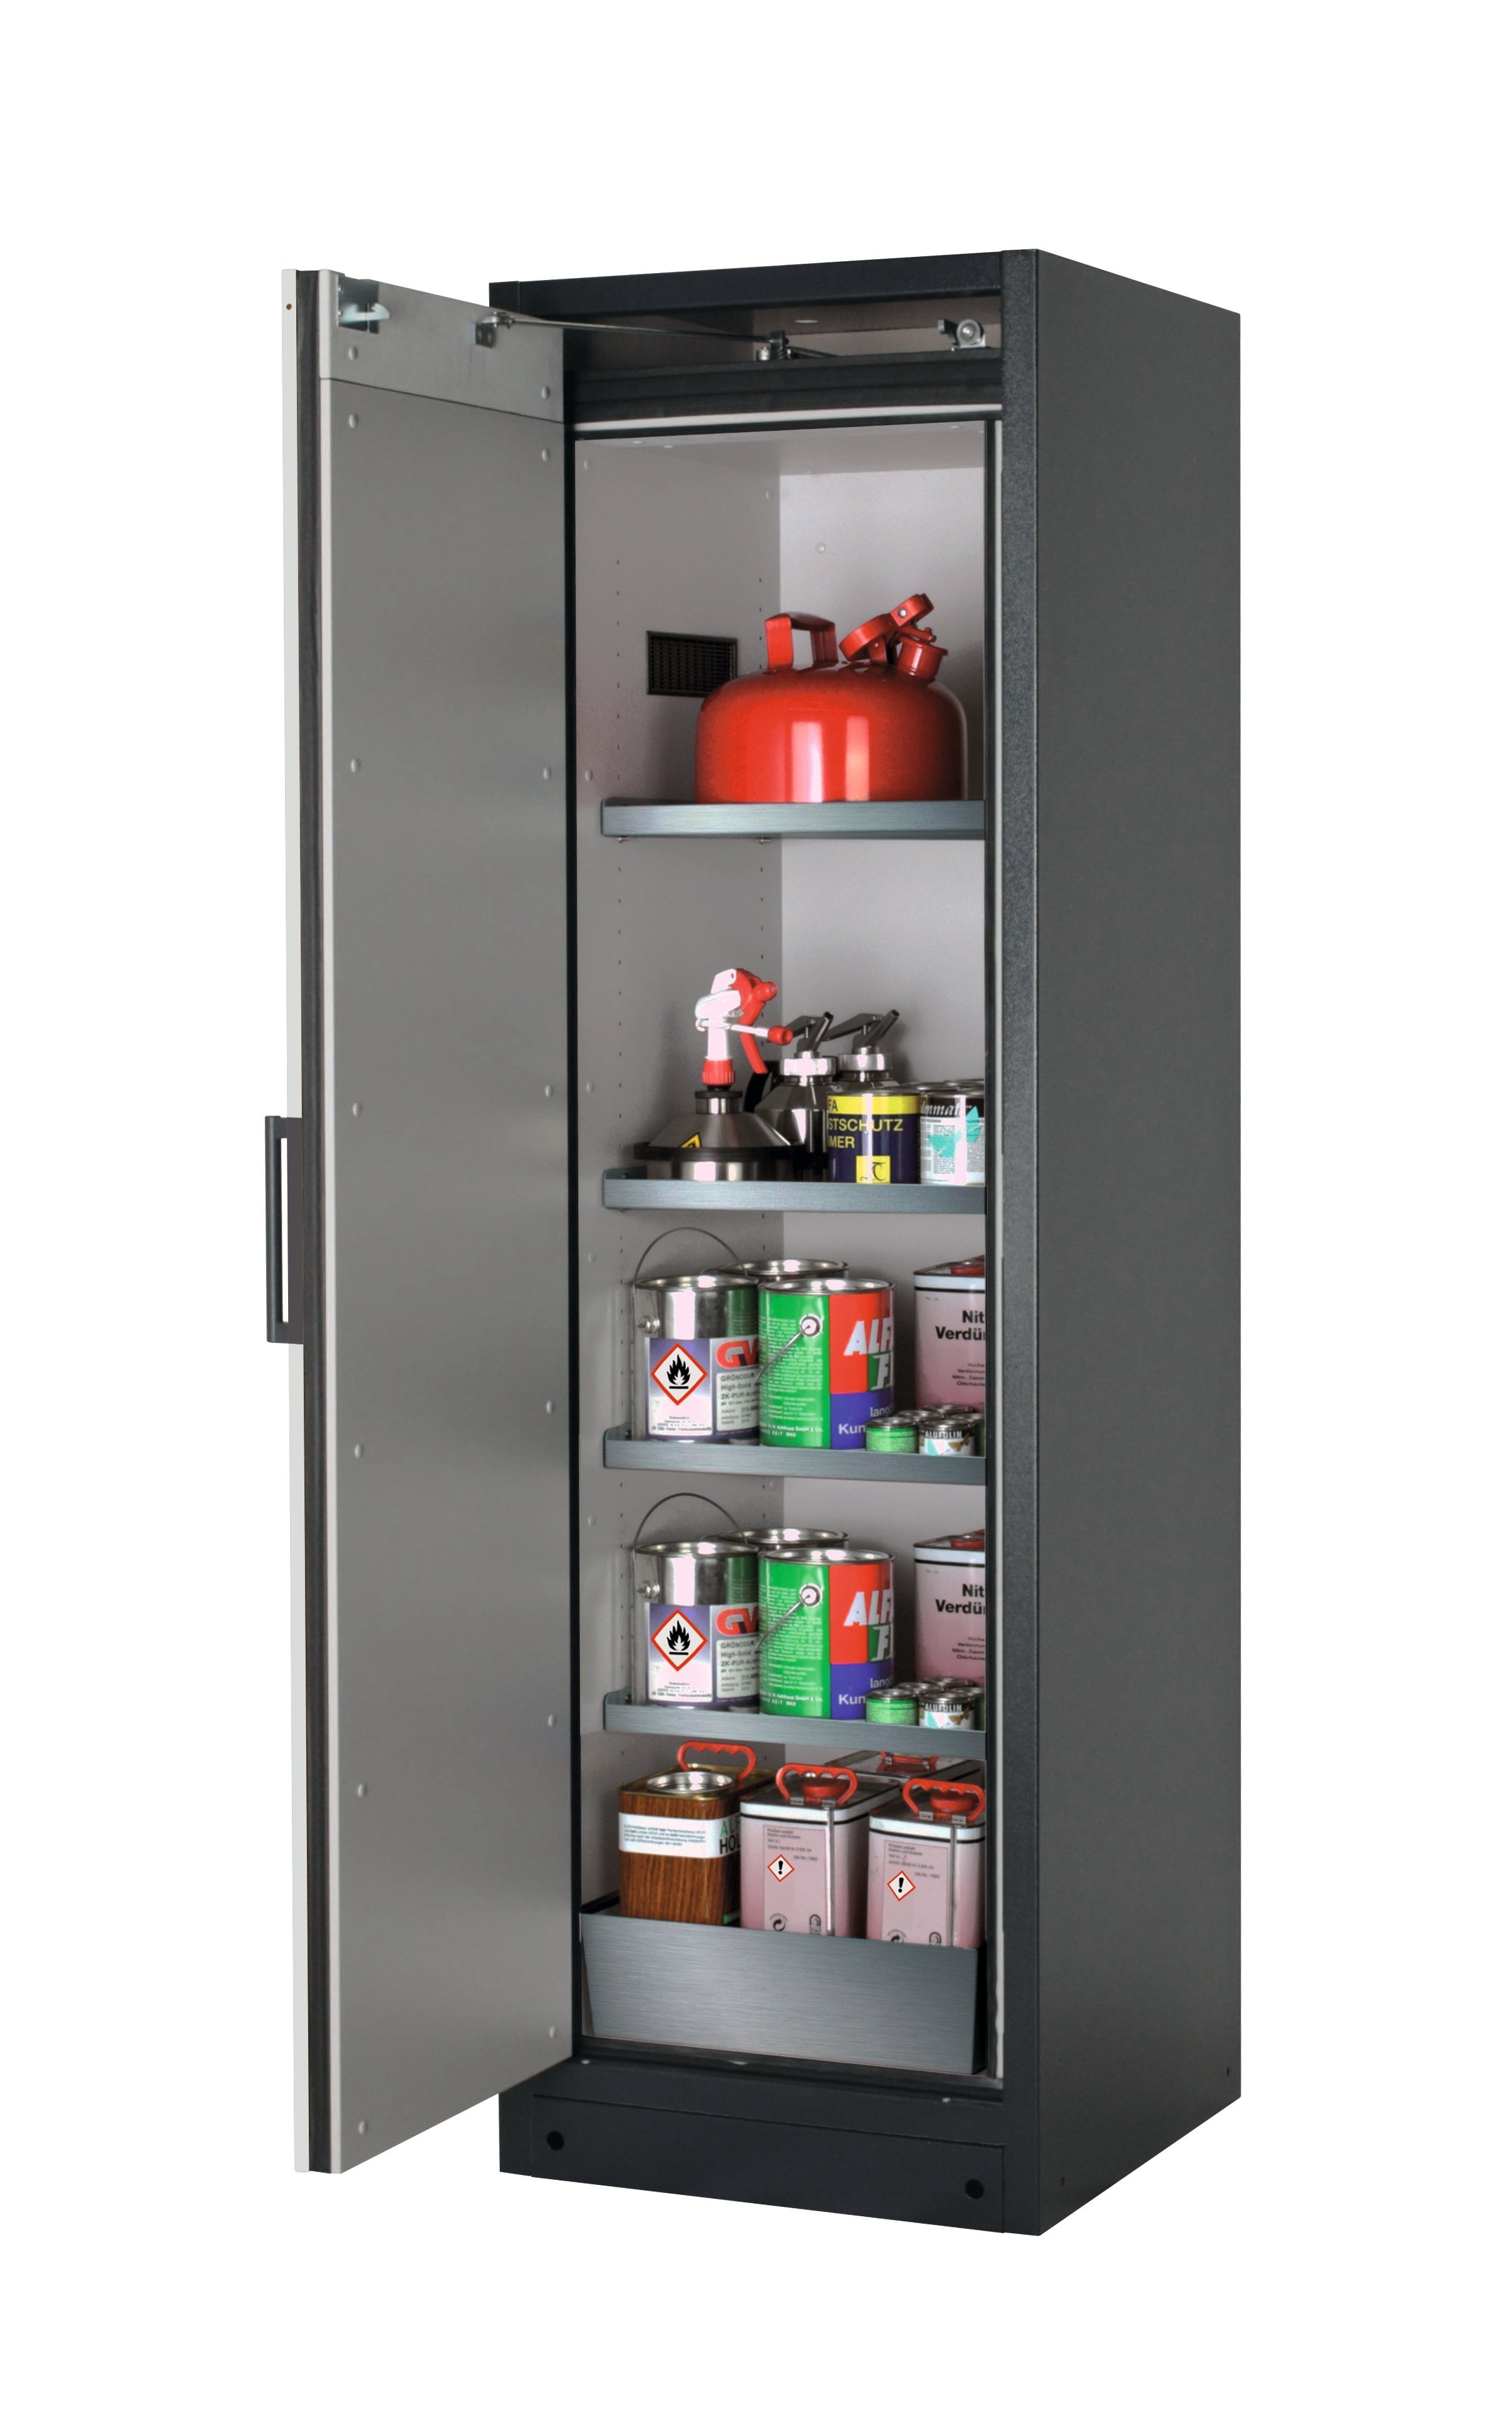 Type 90 safety storage cabinet Q-CLASSIC-90 model Q90.195.060 in light grey RAL 7035 with 4x shelf standard (stainless steel 1.4301),